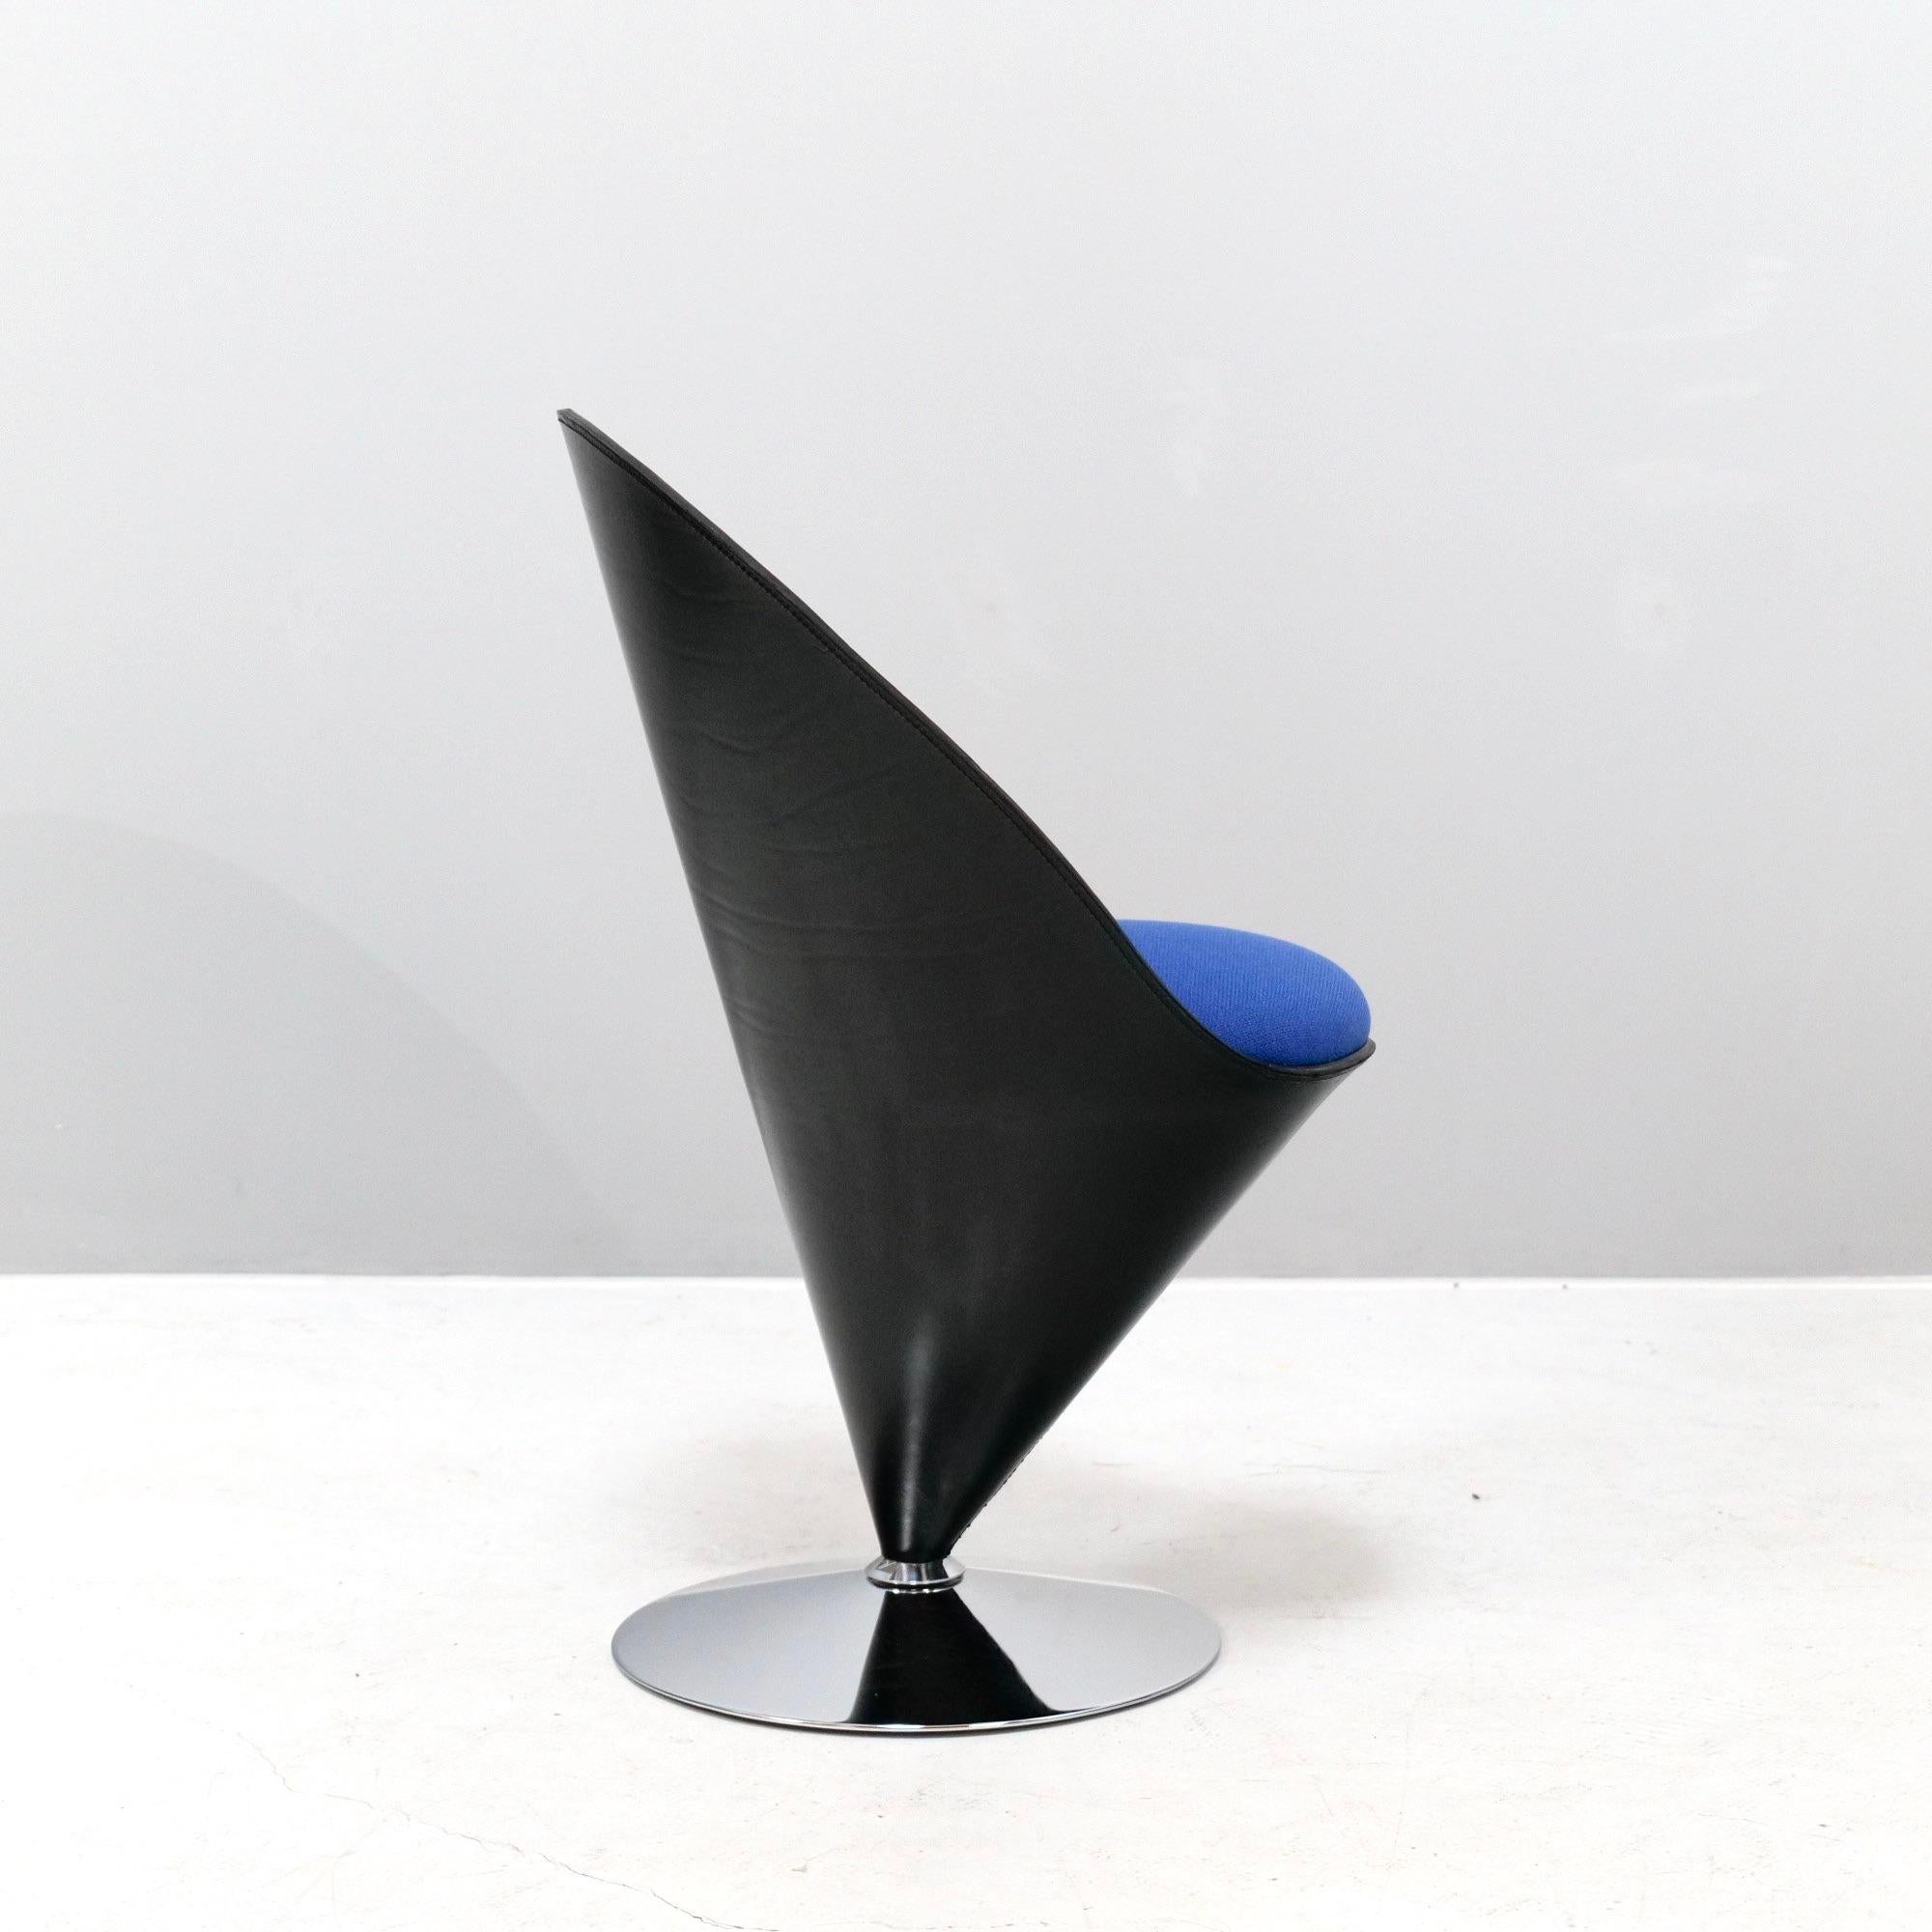 European Verner Panton Leather Cone Chair VP01, Type B, 1994 Limited Edition  For Sale